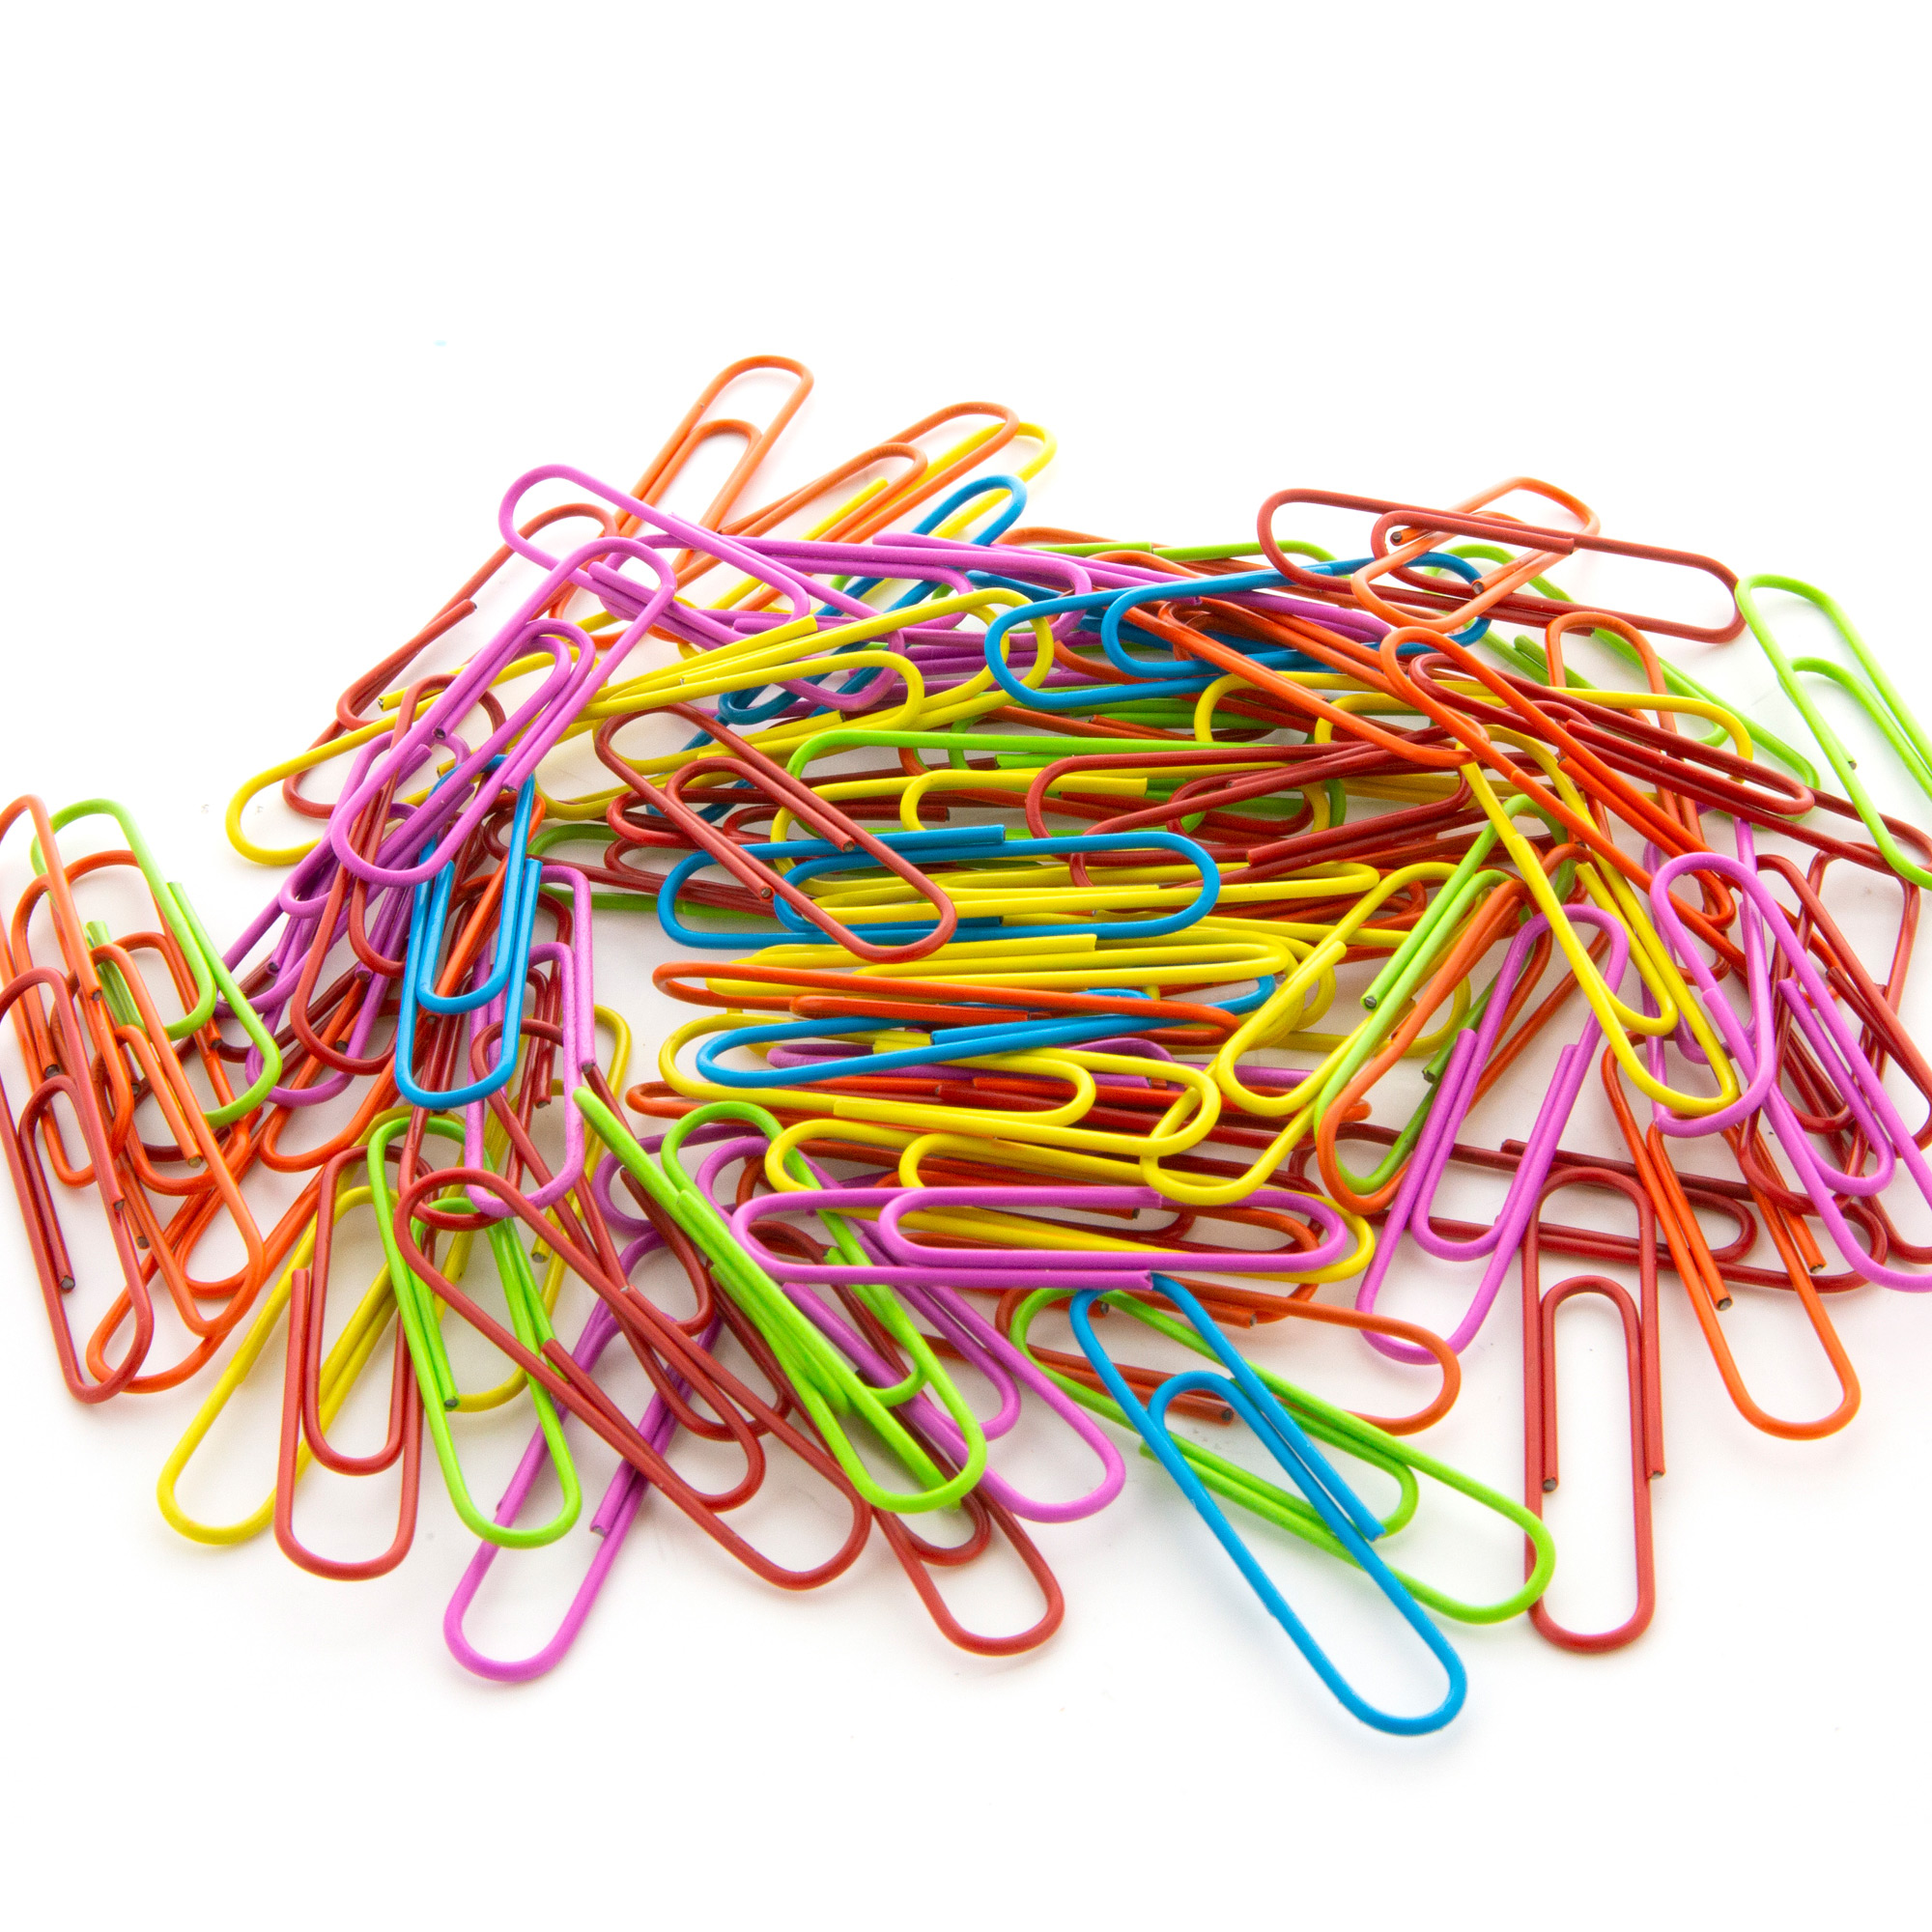 colorful paper clips